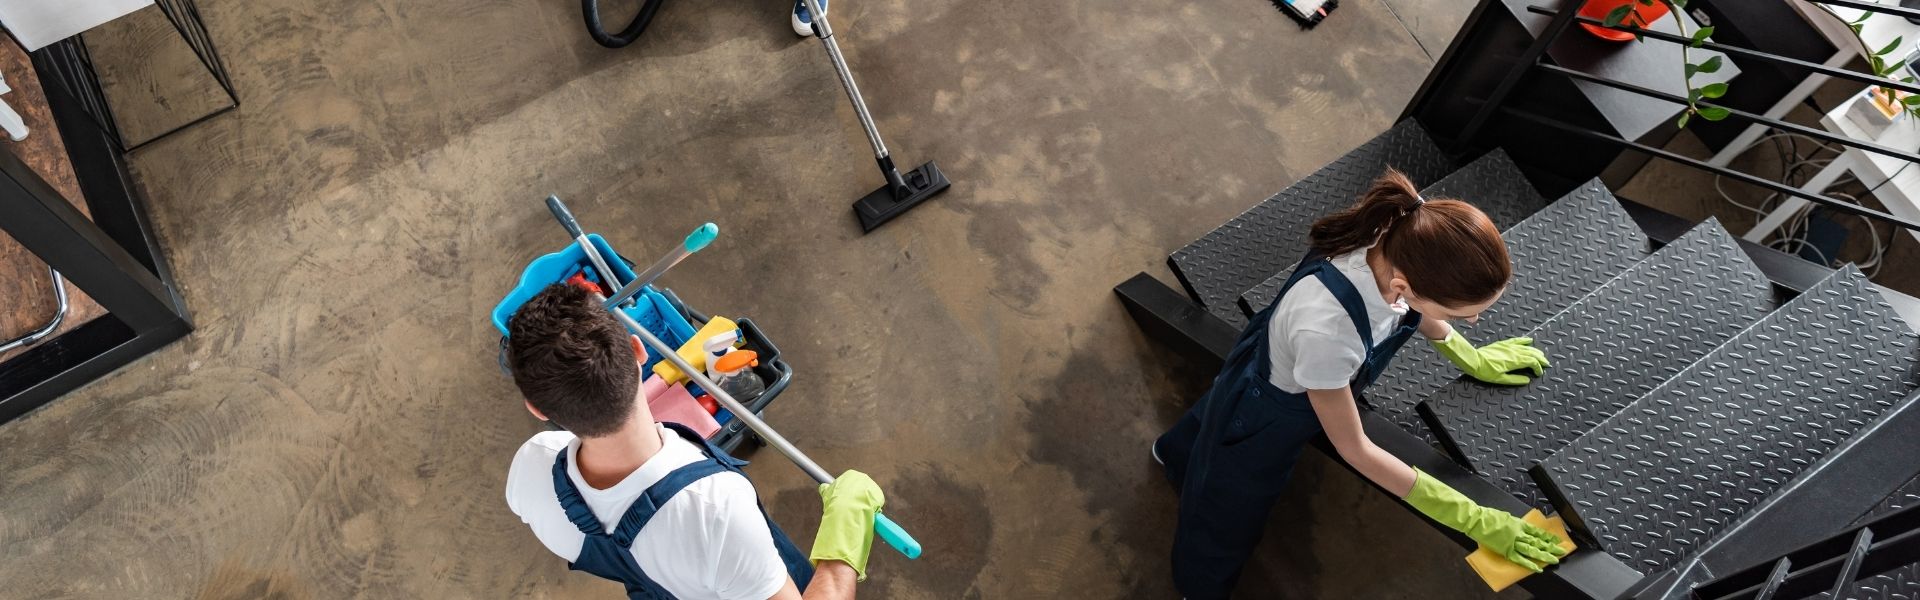 The Signs of Top Rated Professional Cleaning Company in Ontario